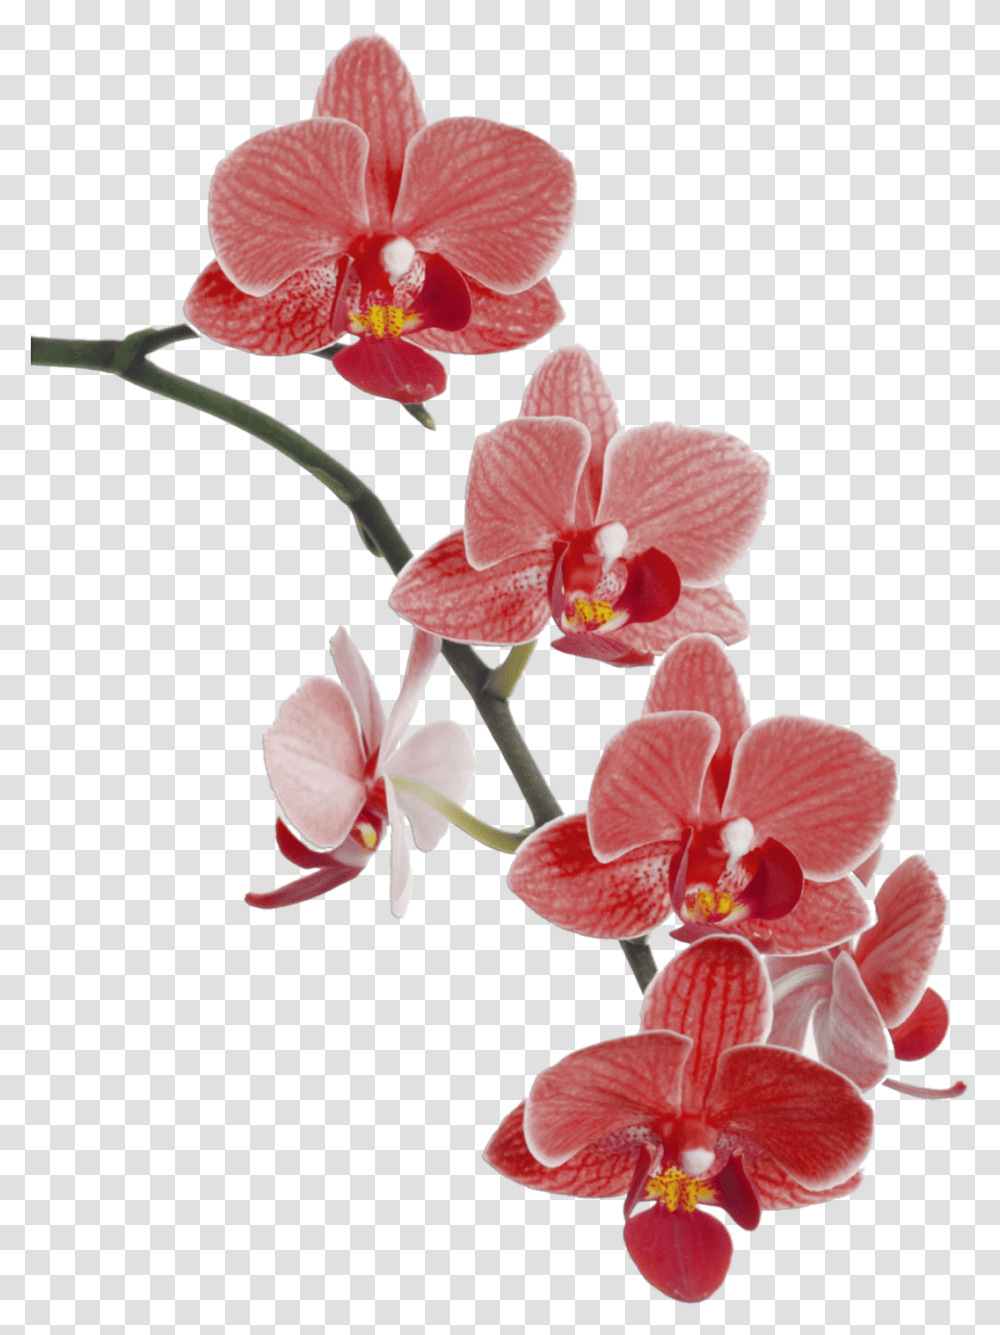 Red Orchids Image With No, Plant, Flower, Blossom Transparent Png